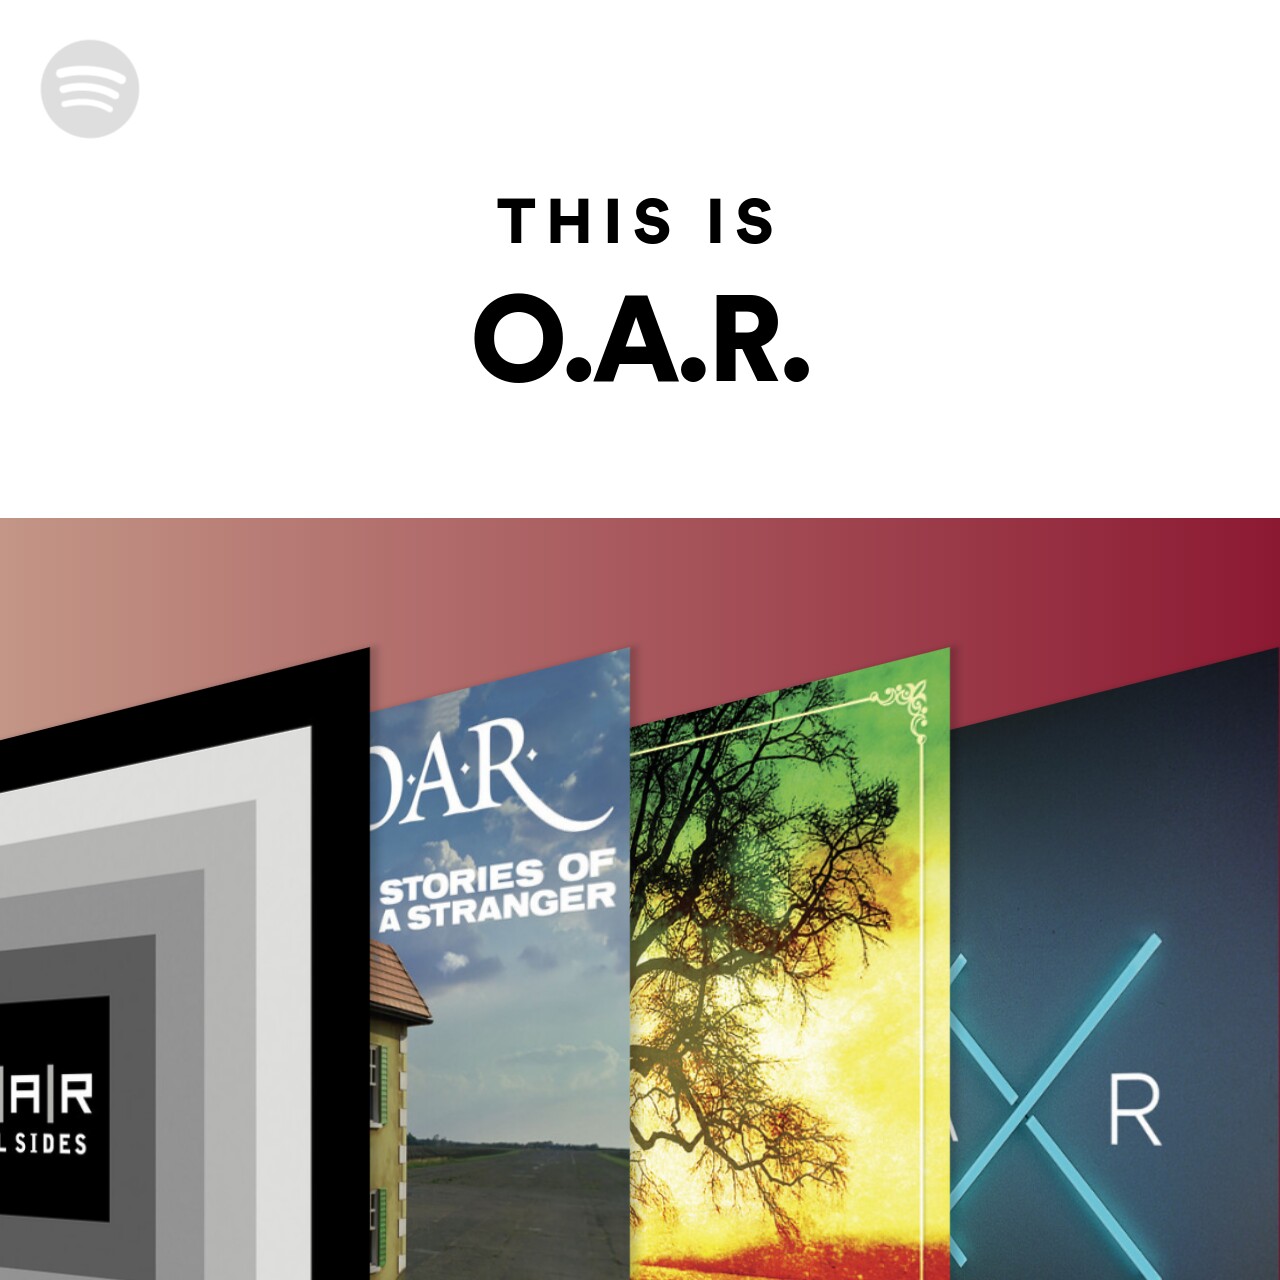 This Is O.A.R.